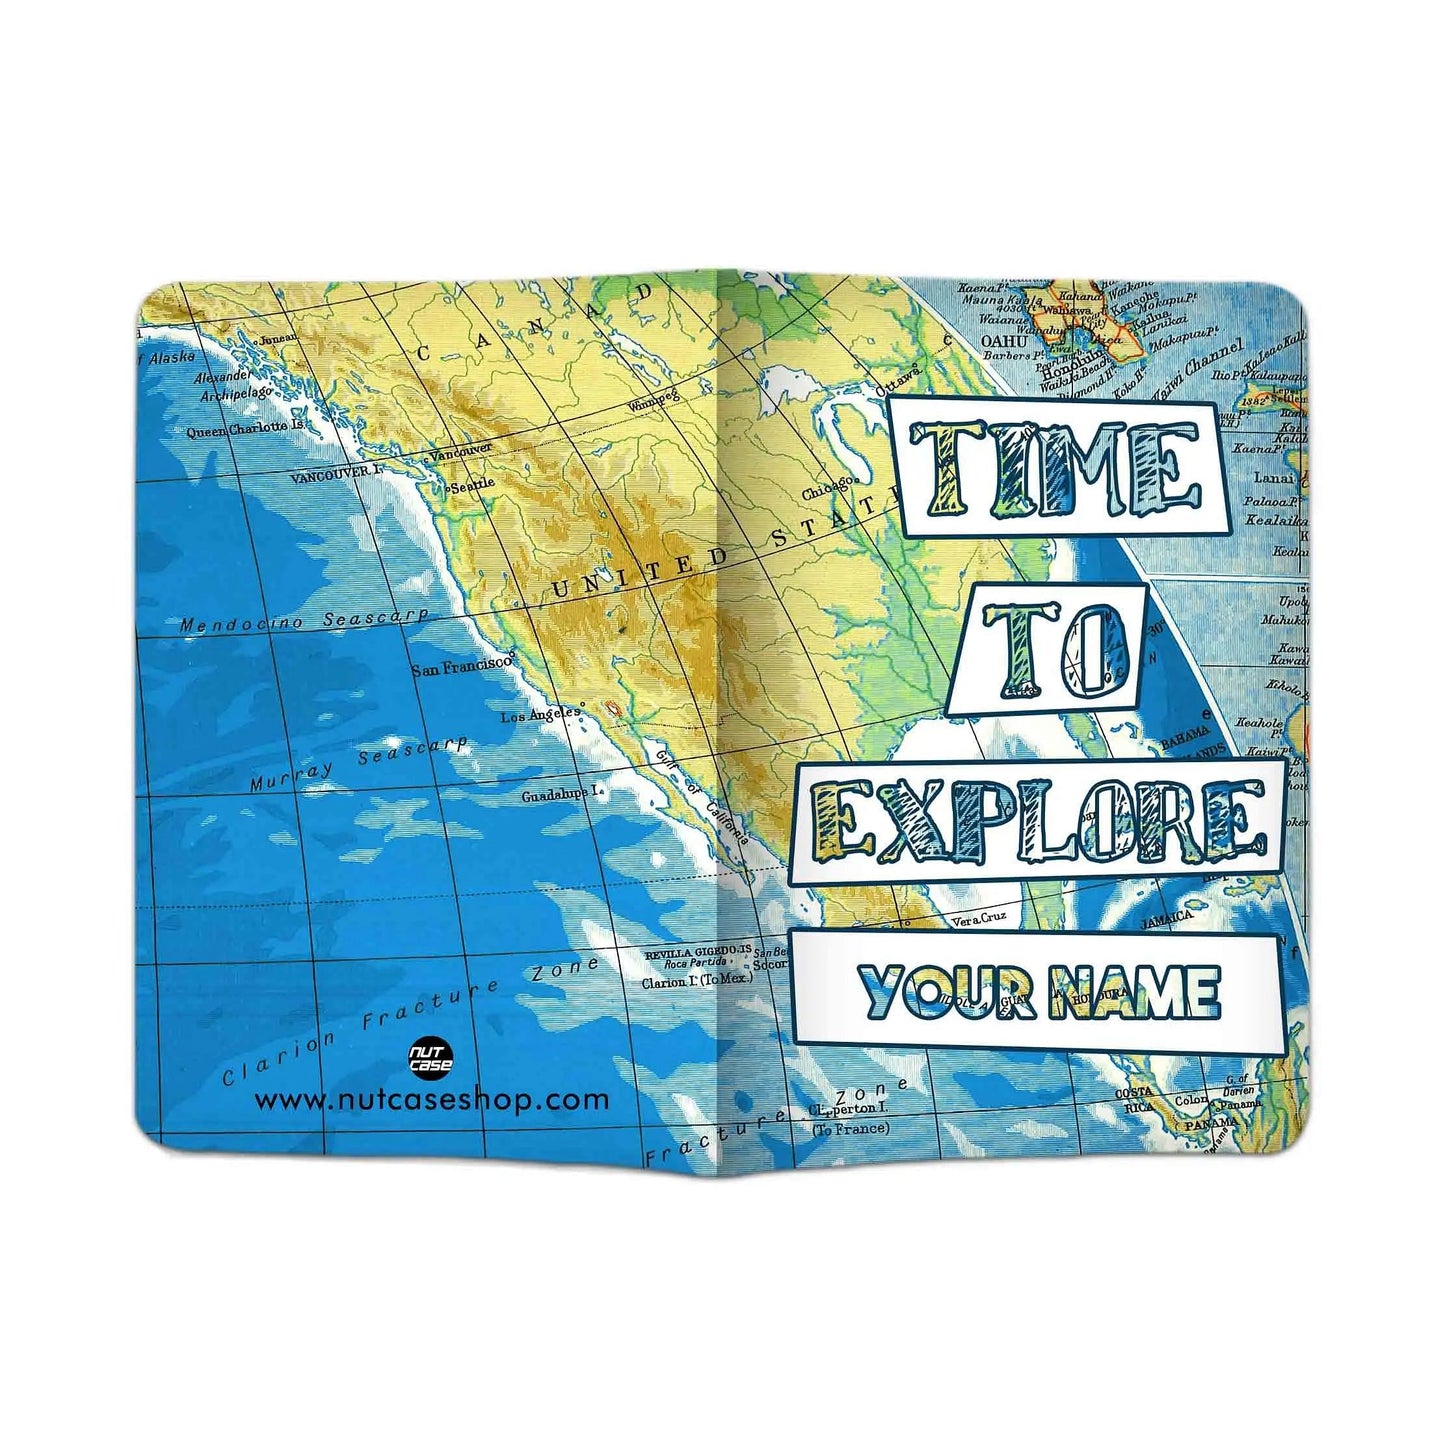 Classy Personalized Passport Cover -  TIME TO EXPLORE - Nutcase